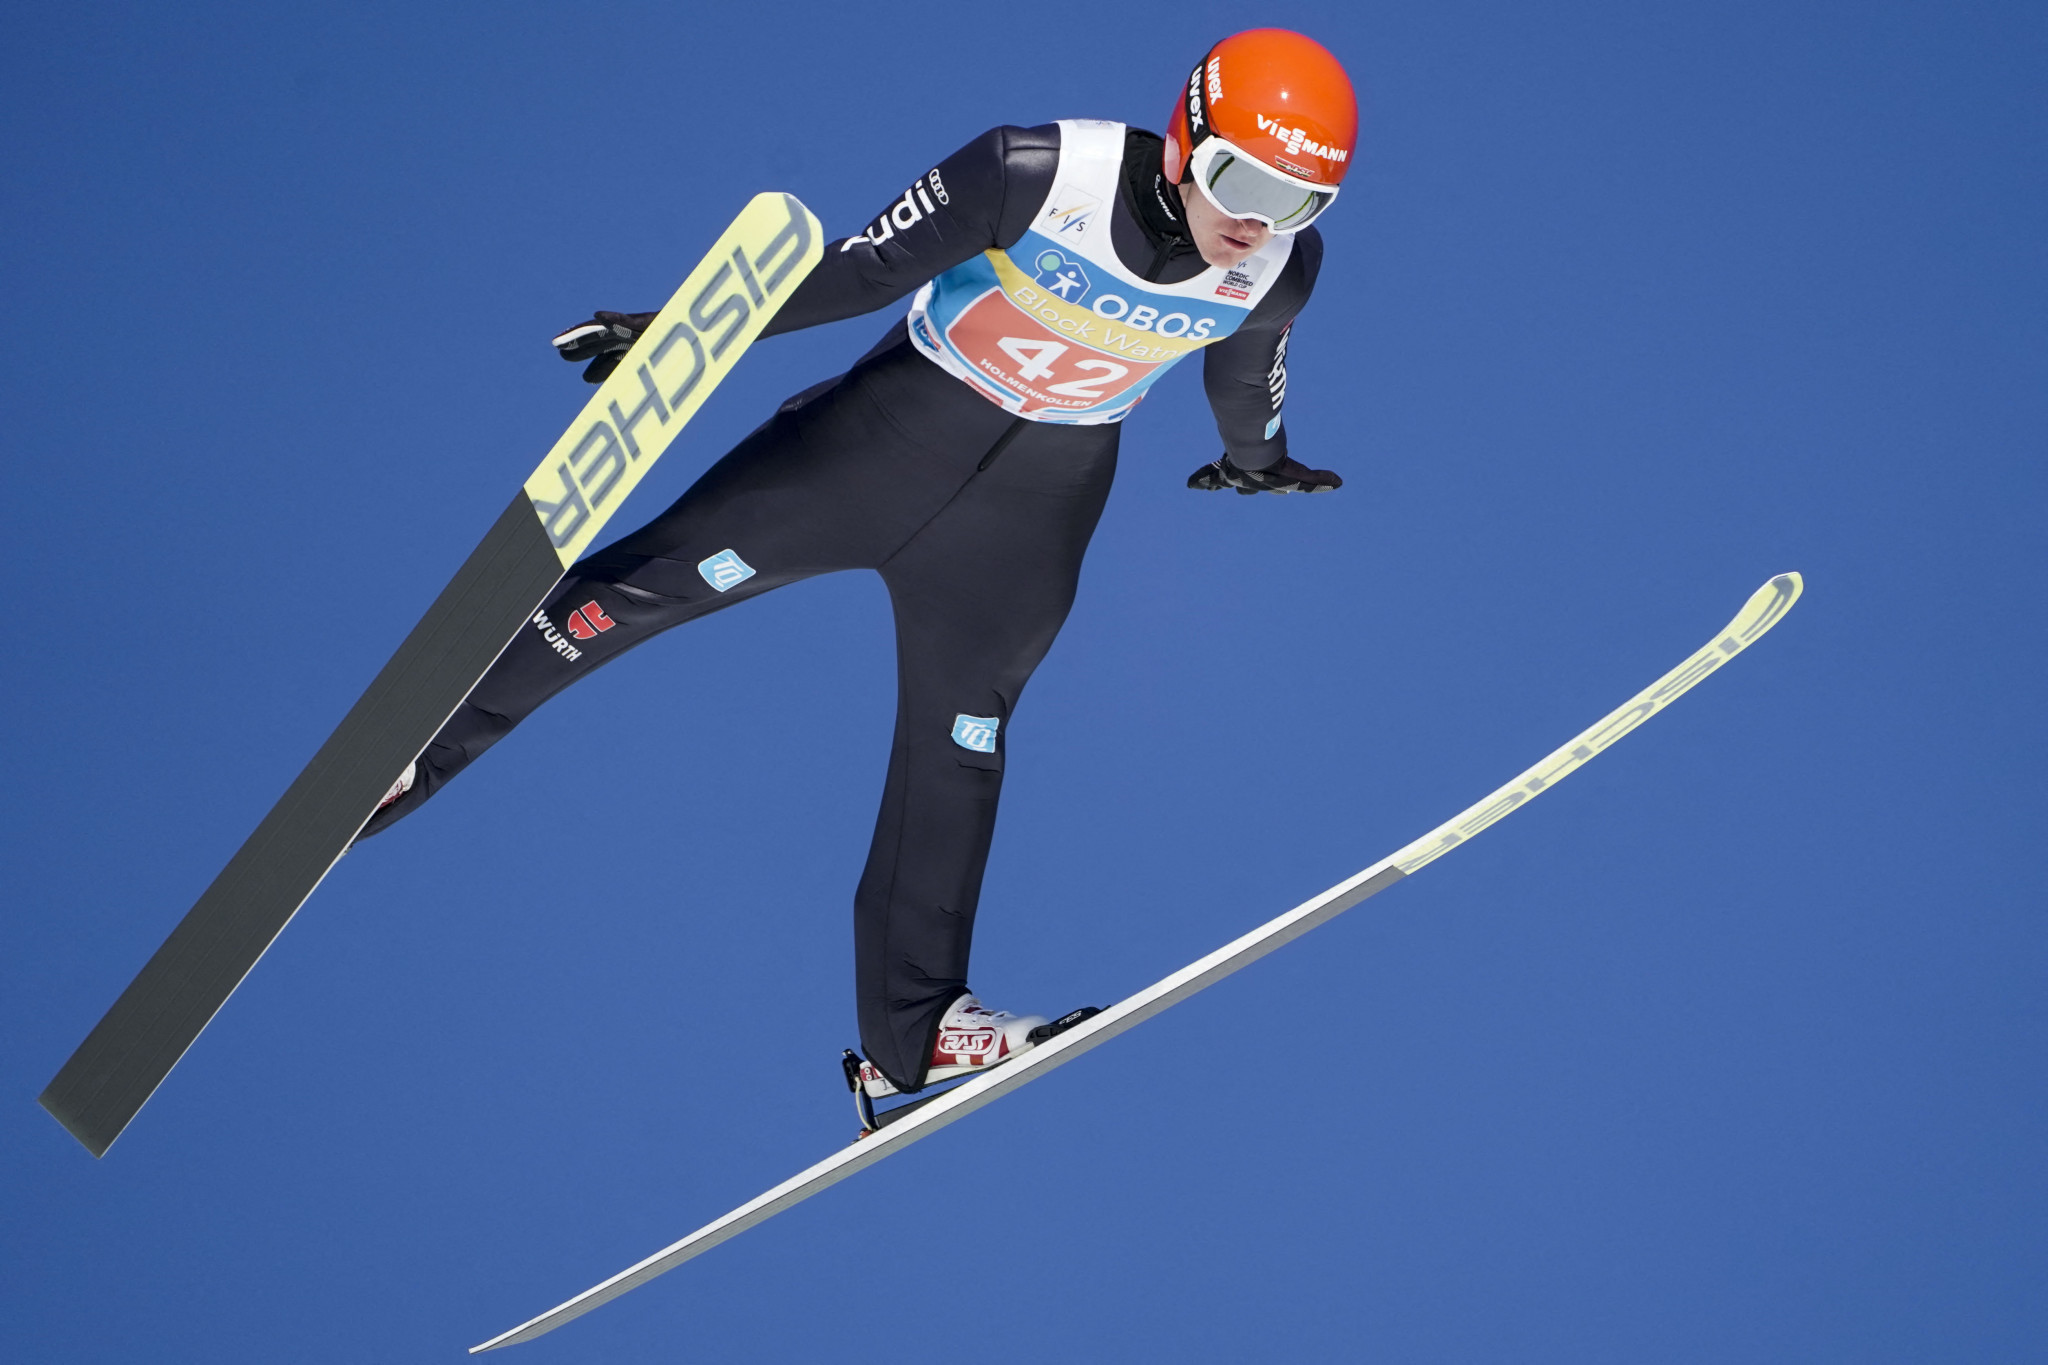 Schmid begins Nordic Combined World Cup season with first-ever win